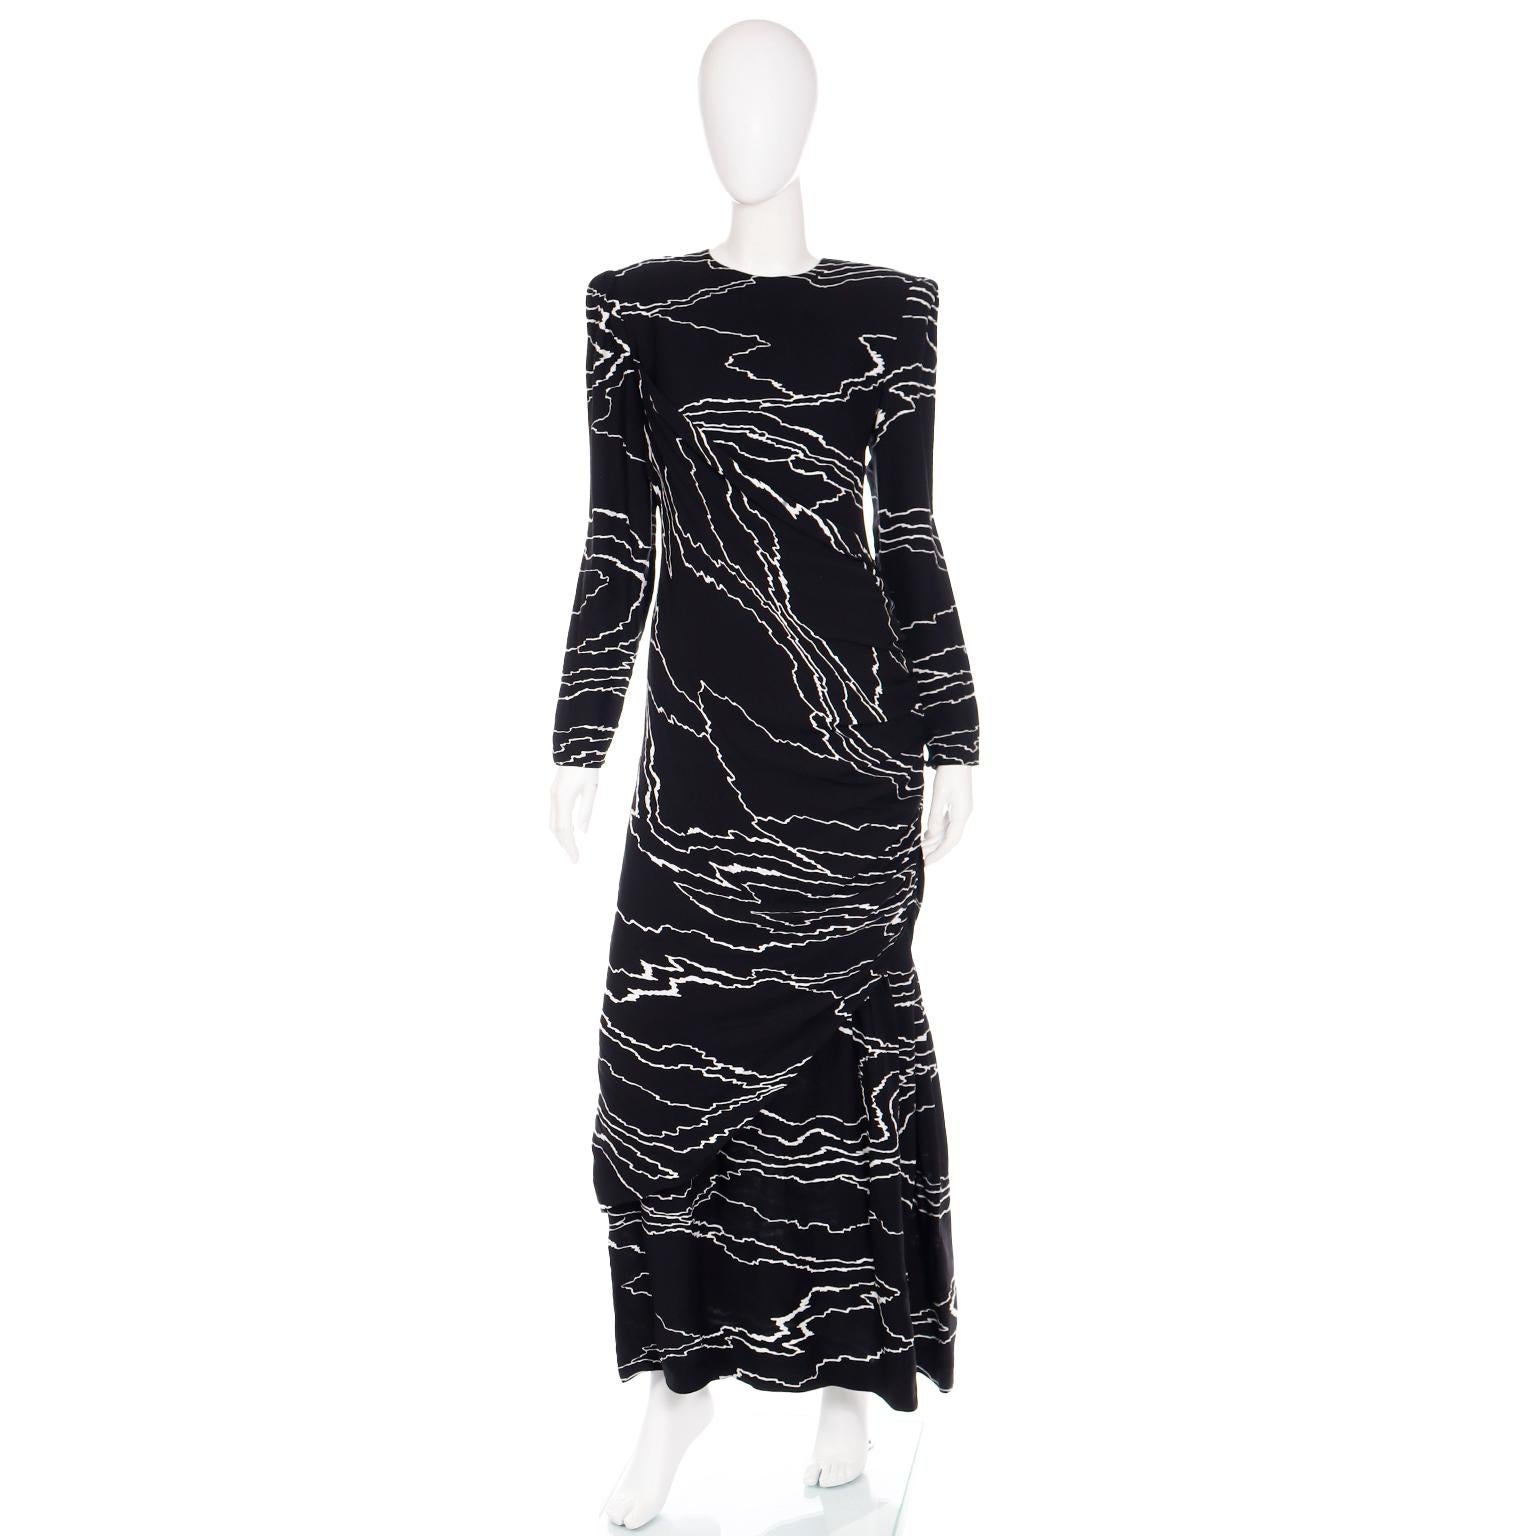 1985 Bill Blass Vintage Runway Dress Abstract Black White Evening Gown Draping For Sale 1